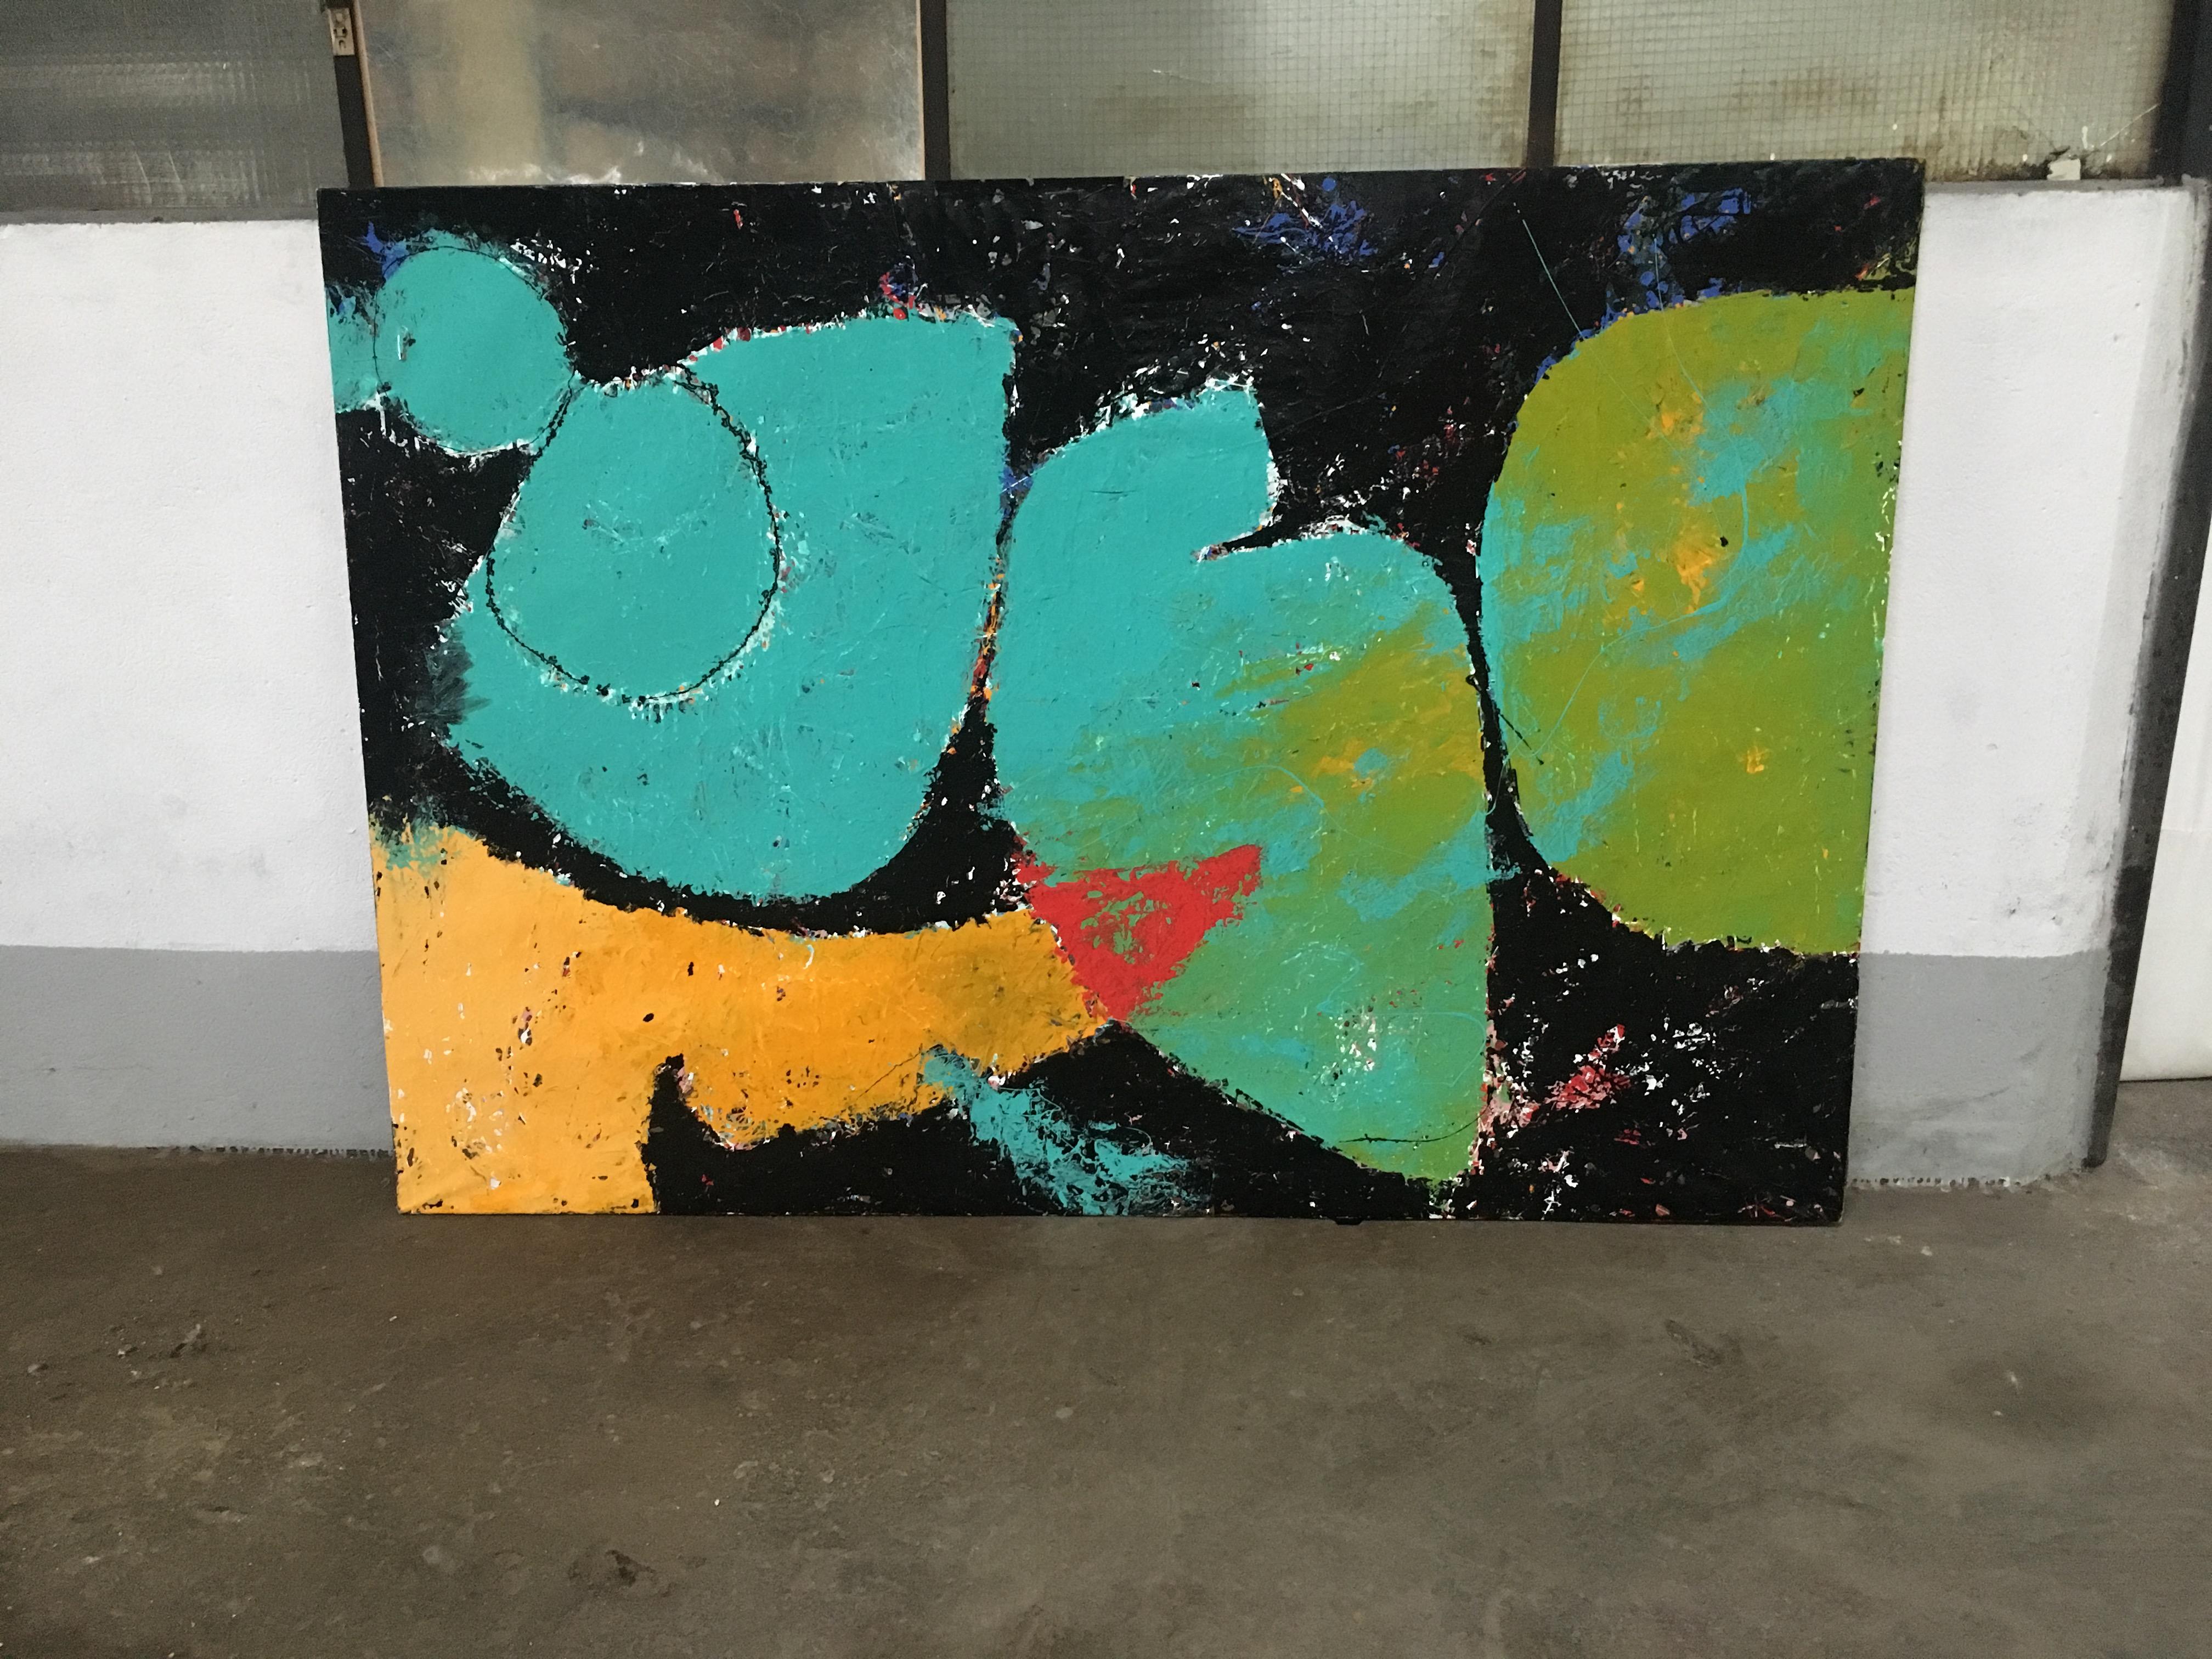 Mid-Century Modern Italian abstract painting on paper with wooden structure from 1970
The paper of the paint shows little signs of wear consistent with age and use as it is visible from the photos.
 